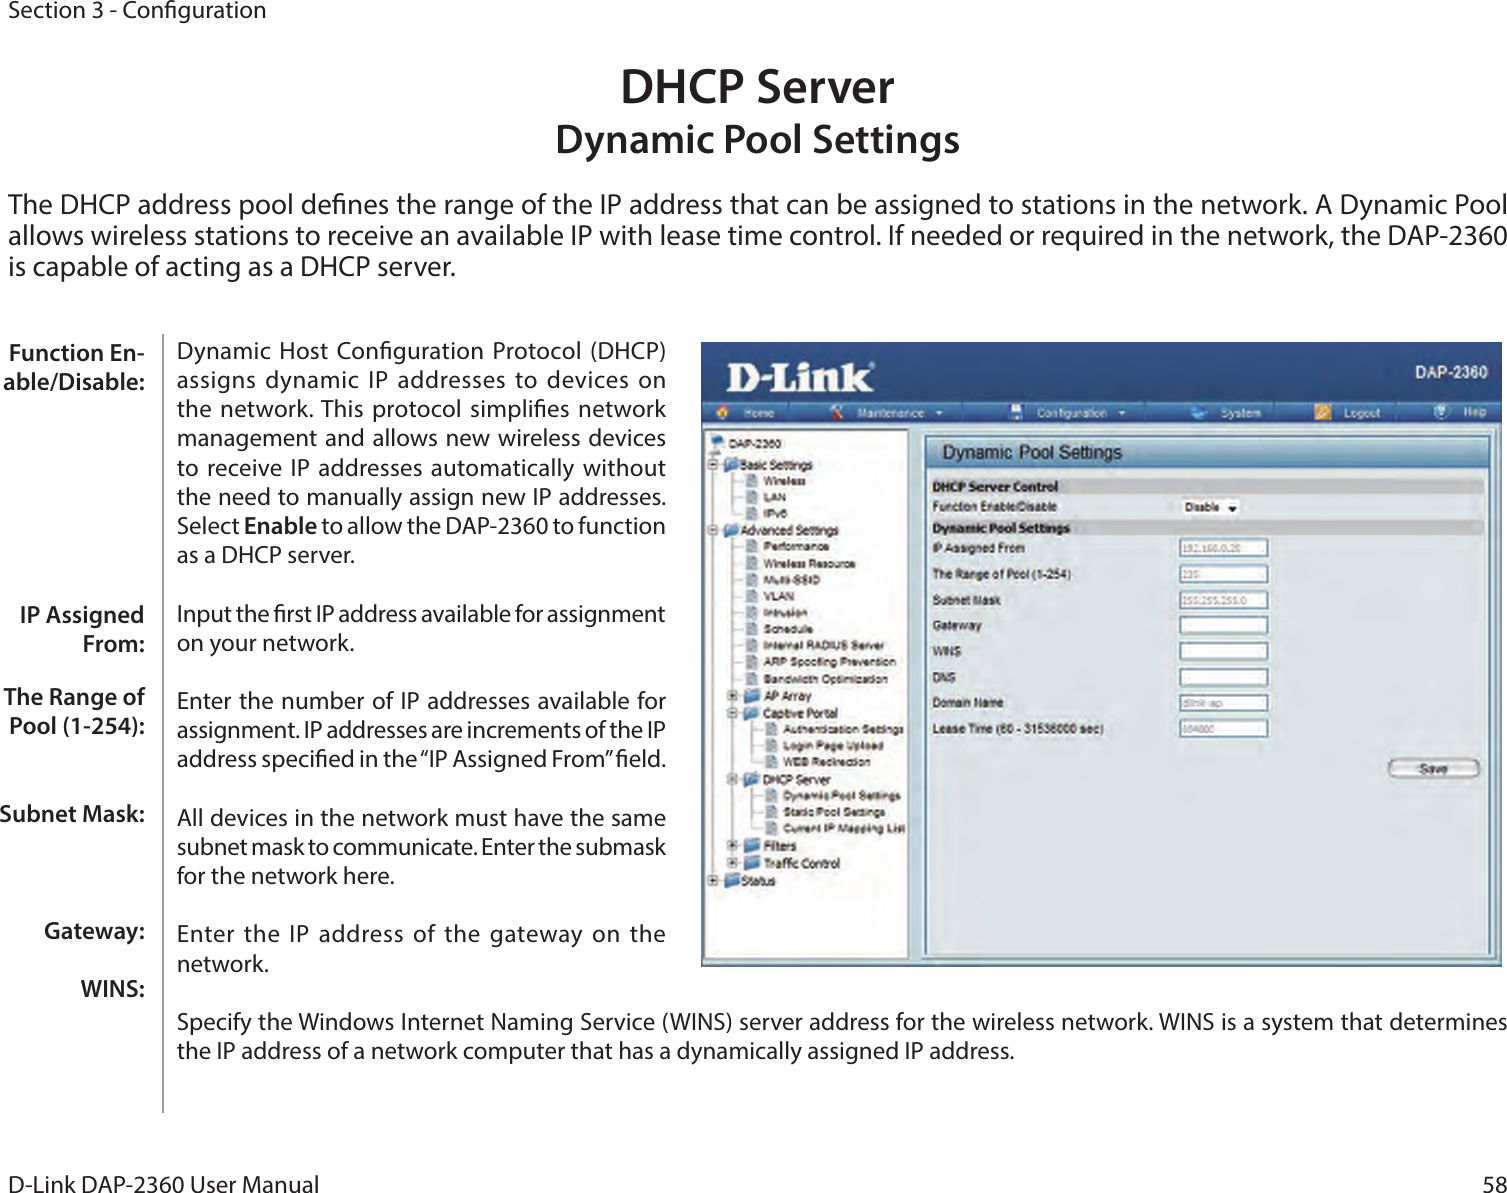 58D-Link DAP-2360 User ManualSection 3 - CongurationDHCP Server Dynamic Pool SettingsThe DHCP address pool denes the range of the IP address that can be assigned to stations in the network. A Dynamic Pool allows wireless stations to receive an available IP with lease time control. If needed or required in the network, the DAP-2360 is capable of acting as a DHCP server.Dynamic  Host  Conguration Protocol  (DHCP) assigns dynamic IP  addresses to devices on the network. This  protocol simplies network management and allows new wireless devices to receive IP addresses automatically without the need to manually assign new IP addresses. Select Enable to allow the DAP-2360 to function as a DHCP server.Input the rst IP address available for assignment on your network.Enter the number of IP addresses available for assignment. IP addresses are increments of the IP address specied in the “IP Assigned From” eld.All devices in the network must have the same subnet mask to communicate. Enter the submask for the network here.Enter the IP  address of the  gateway  on the network.Specify the Windows Internet Naming Service (WINS) server address for the wireless network. WINS is a system that determines the IP address of a network computer that has a dynamically assigned IP address.Function En-able/Disable:IP Assigned From:The Range of Pool (1-254):Subnet Mask:Gateway:WINS: